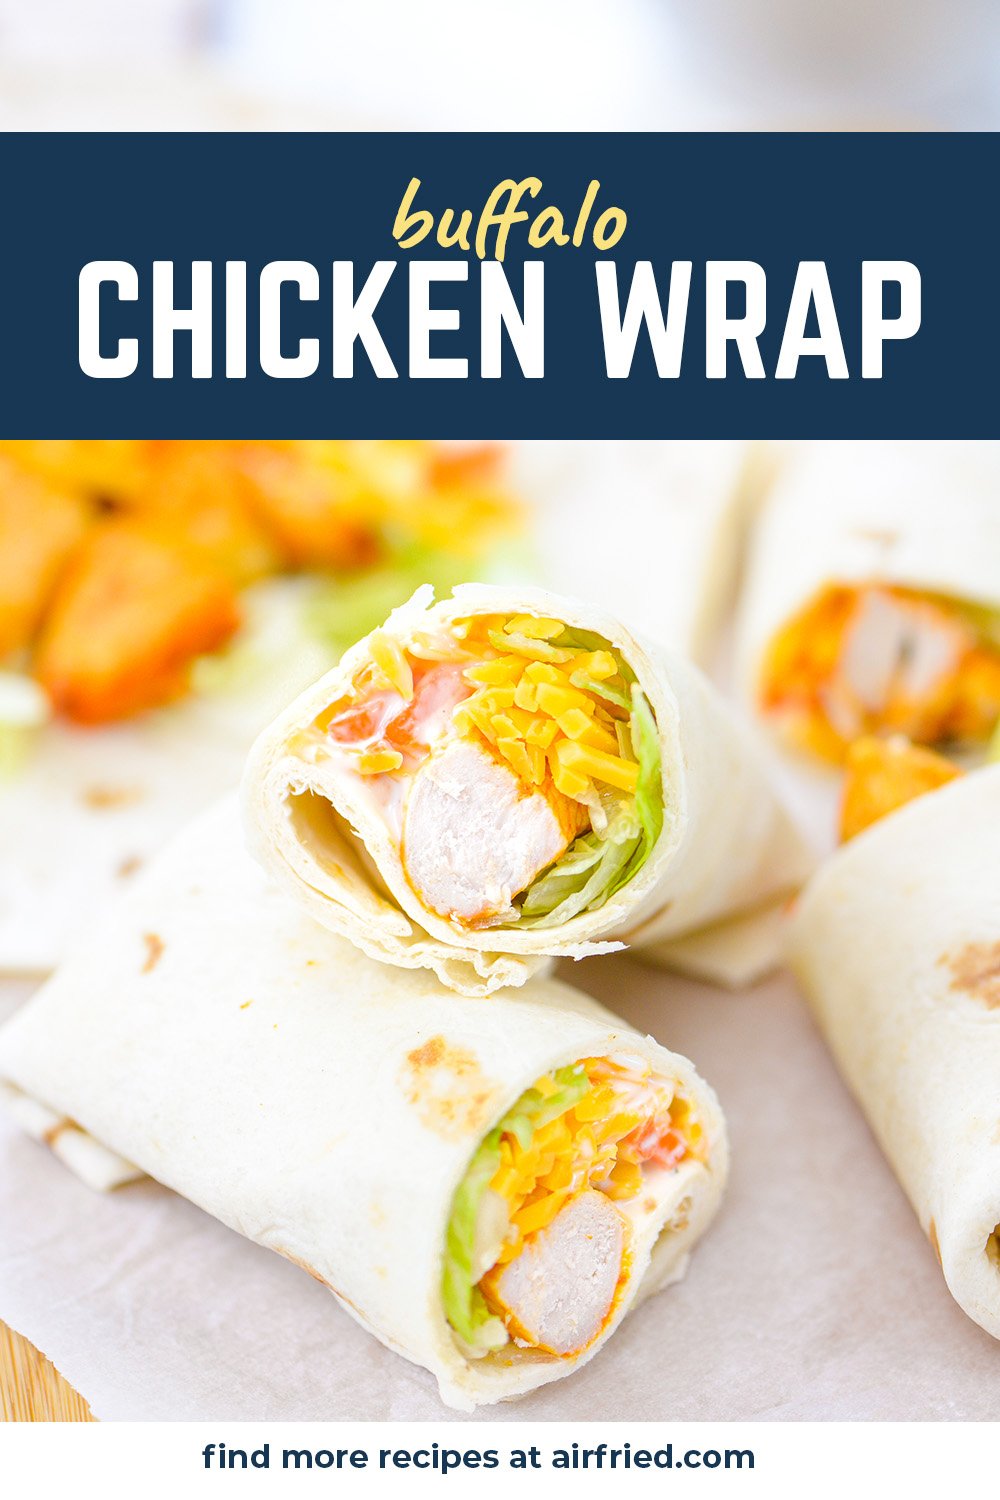 buffalo chicken wrap with text for Pinterest.